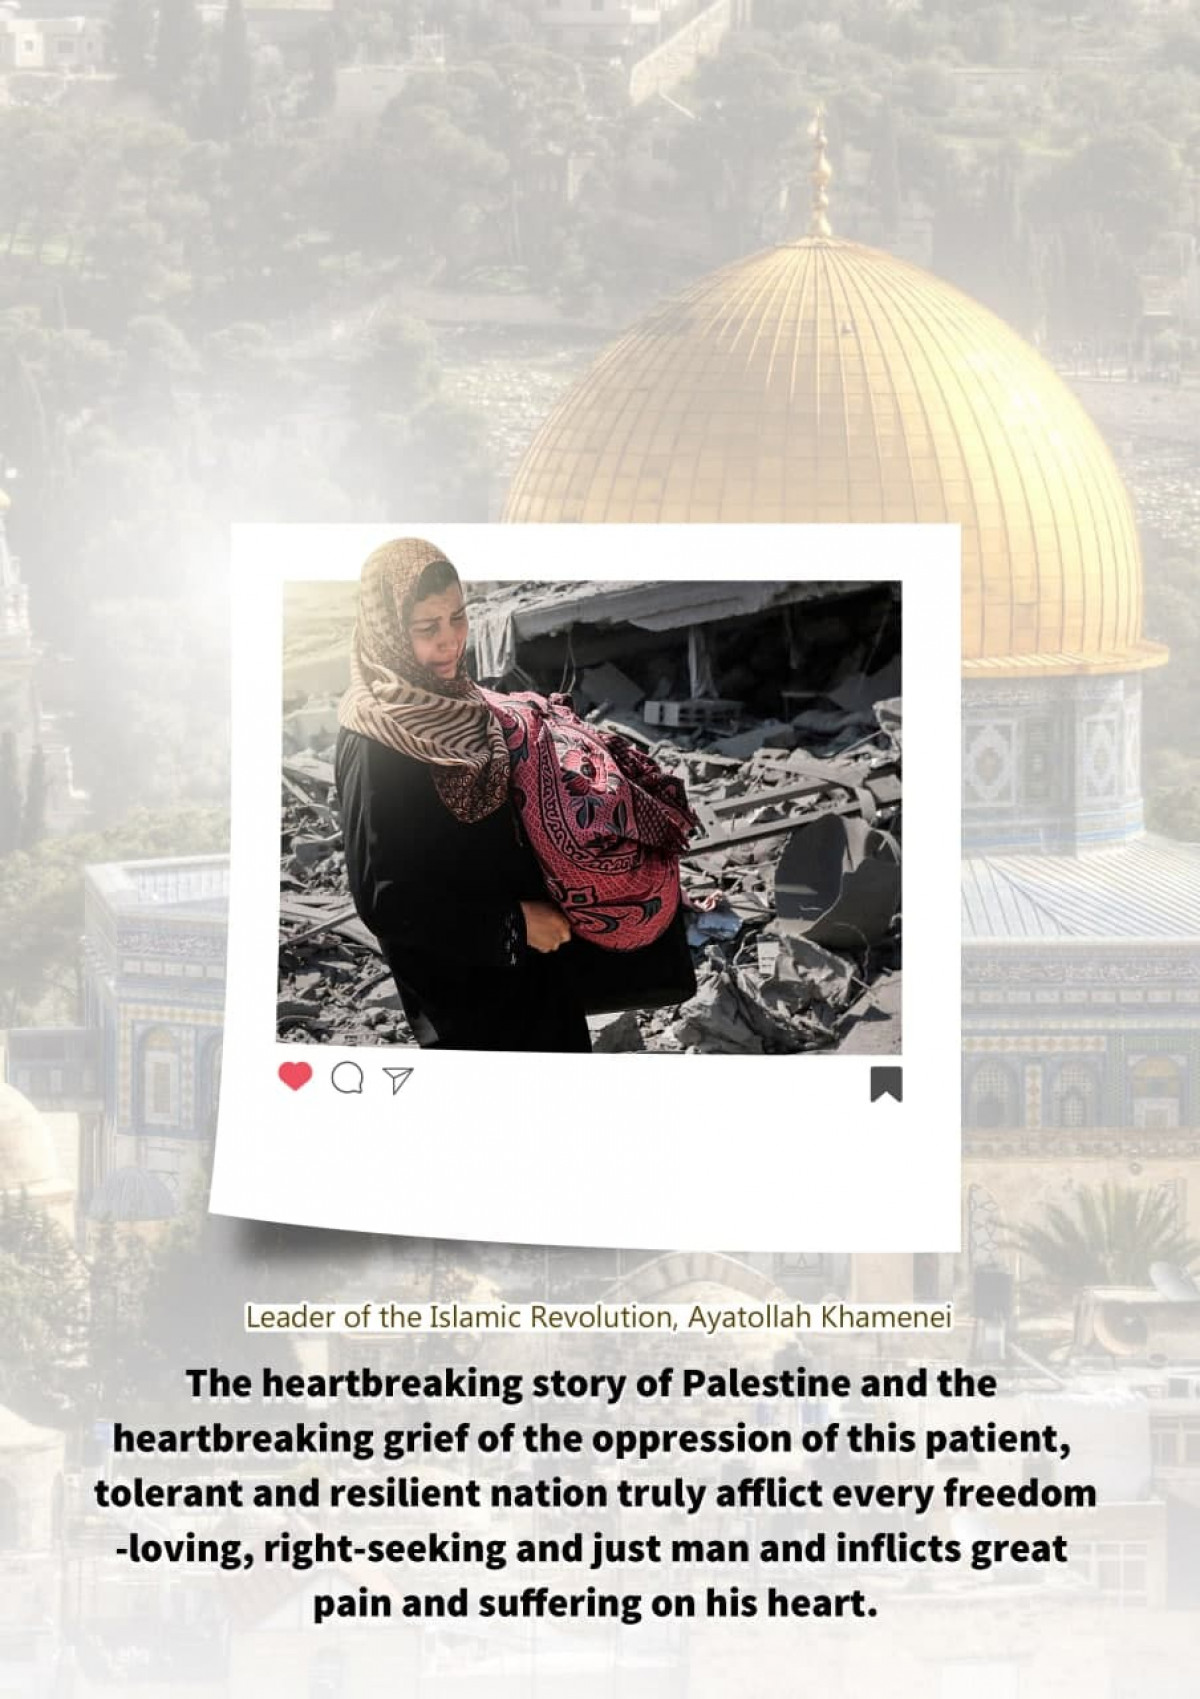 The heartbreaking story of Palestine